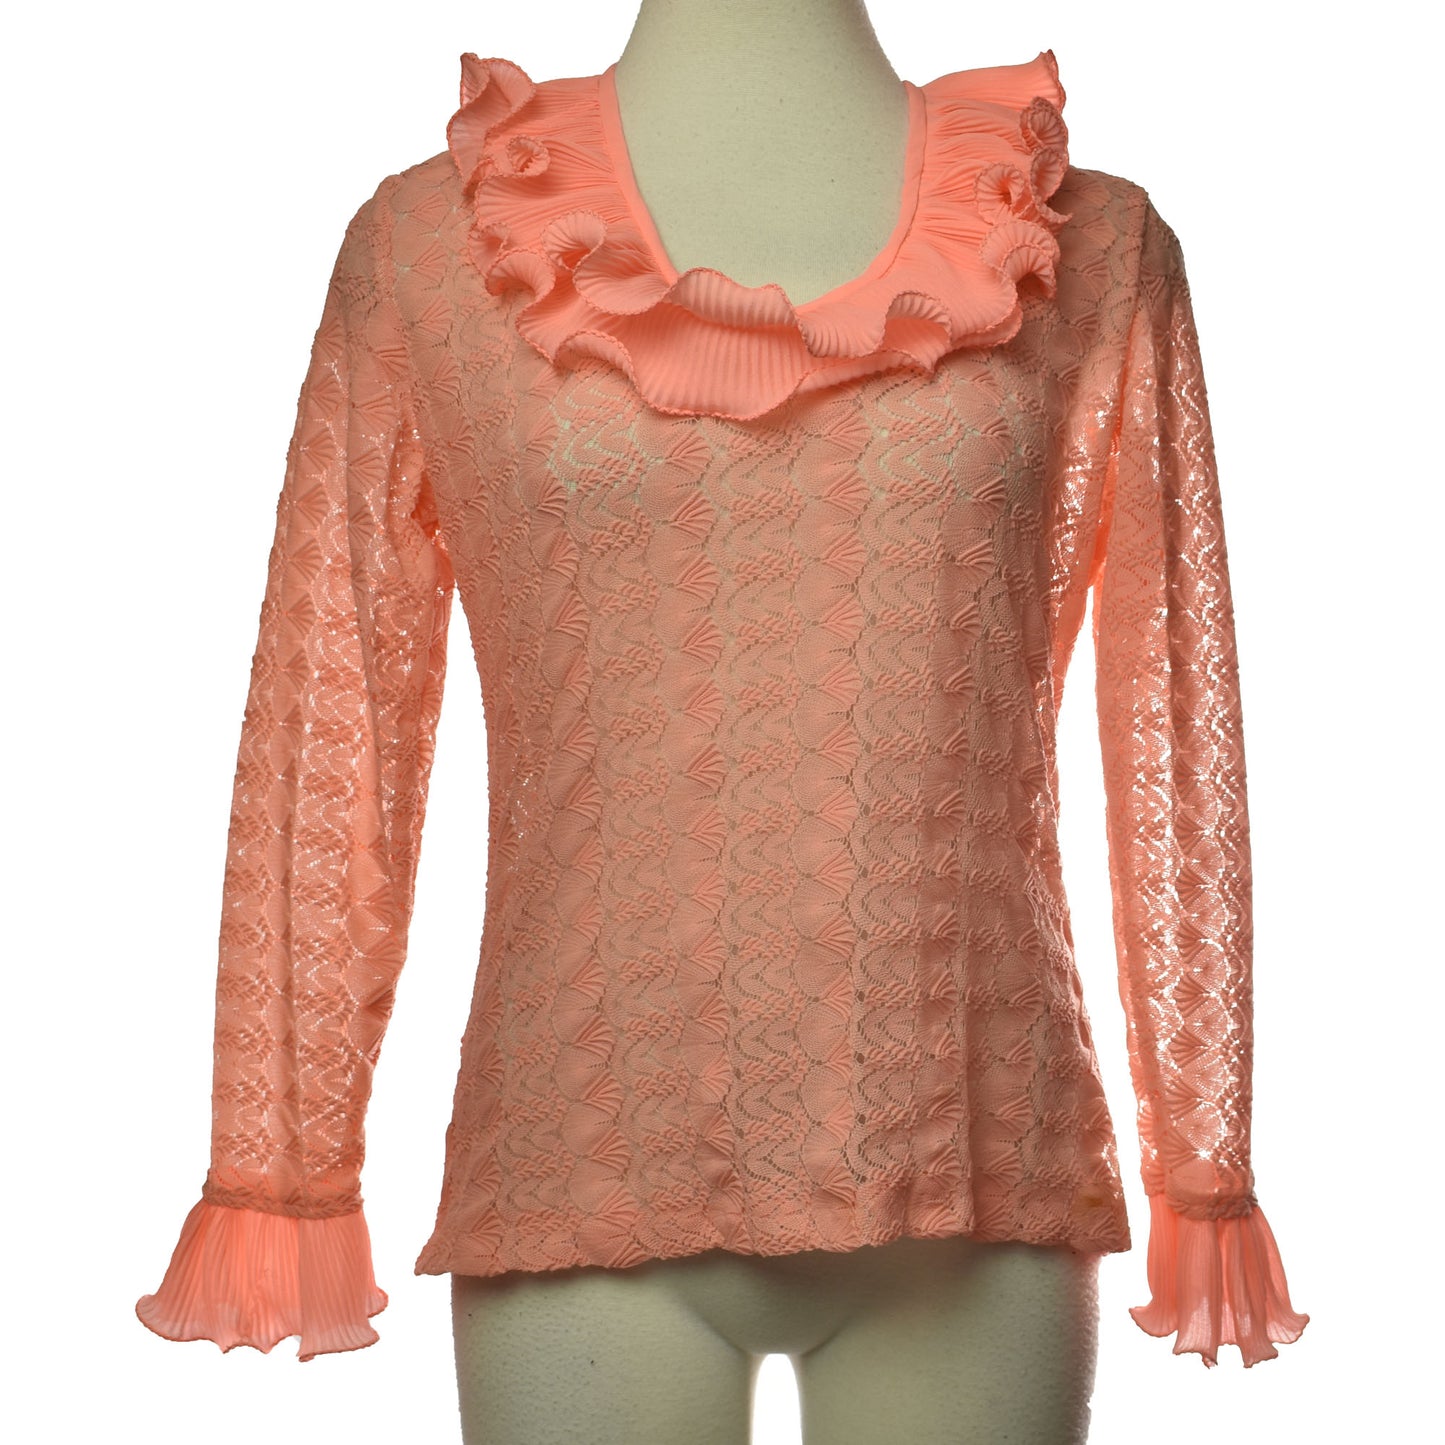 Vintage 70s Peachy Pink Scoop Neck Ruffled Collar Ruffled Sleeve Cuffed Lace Long Sleeved Sears Blouse